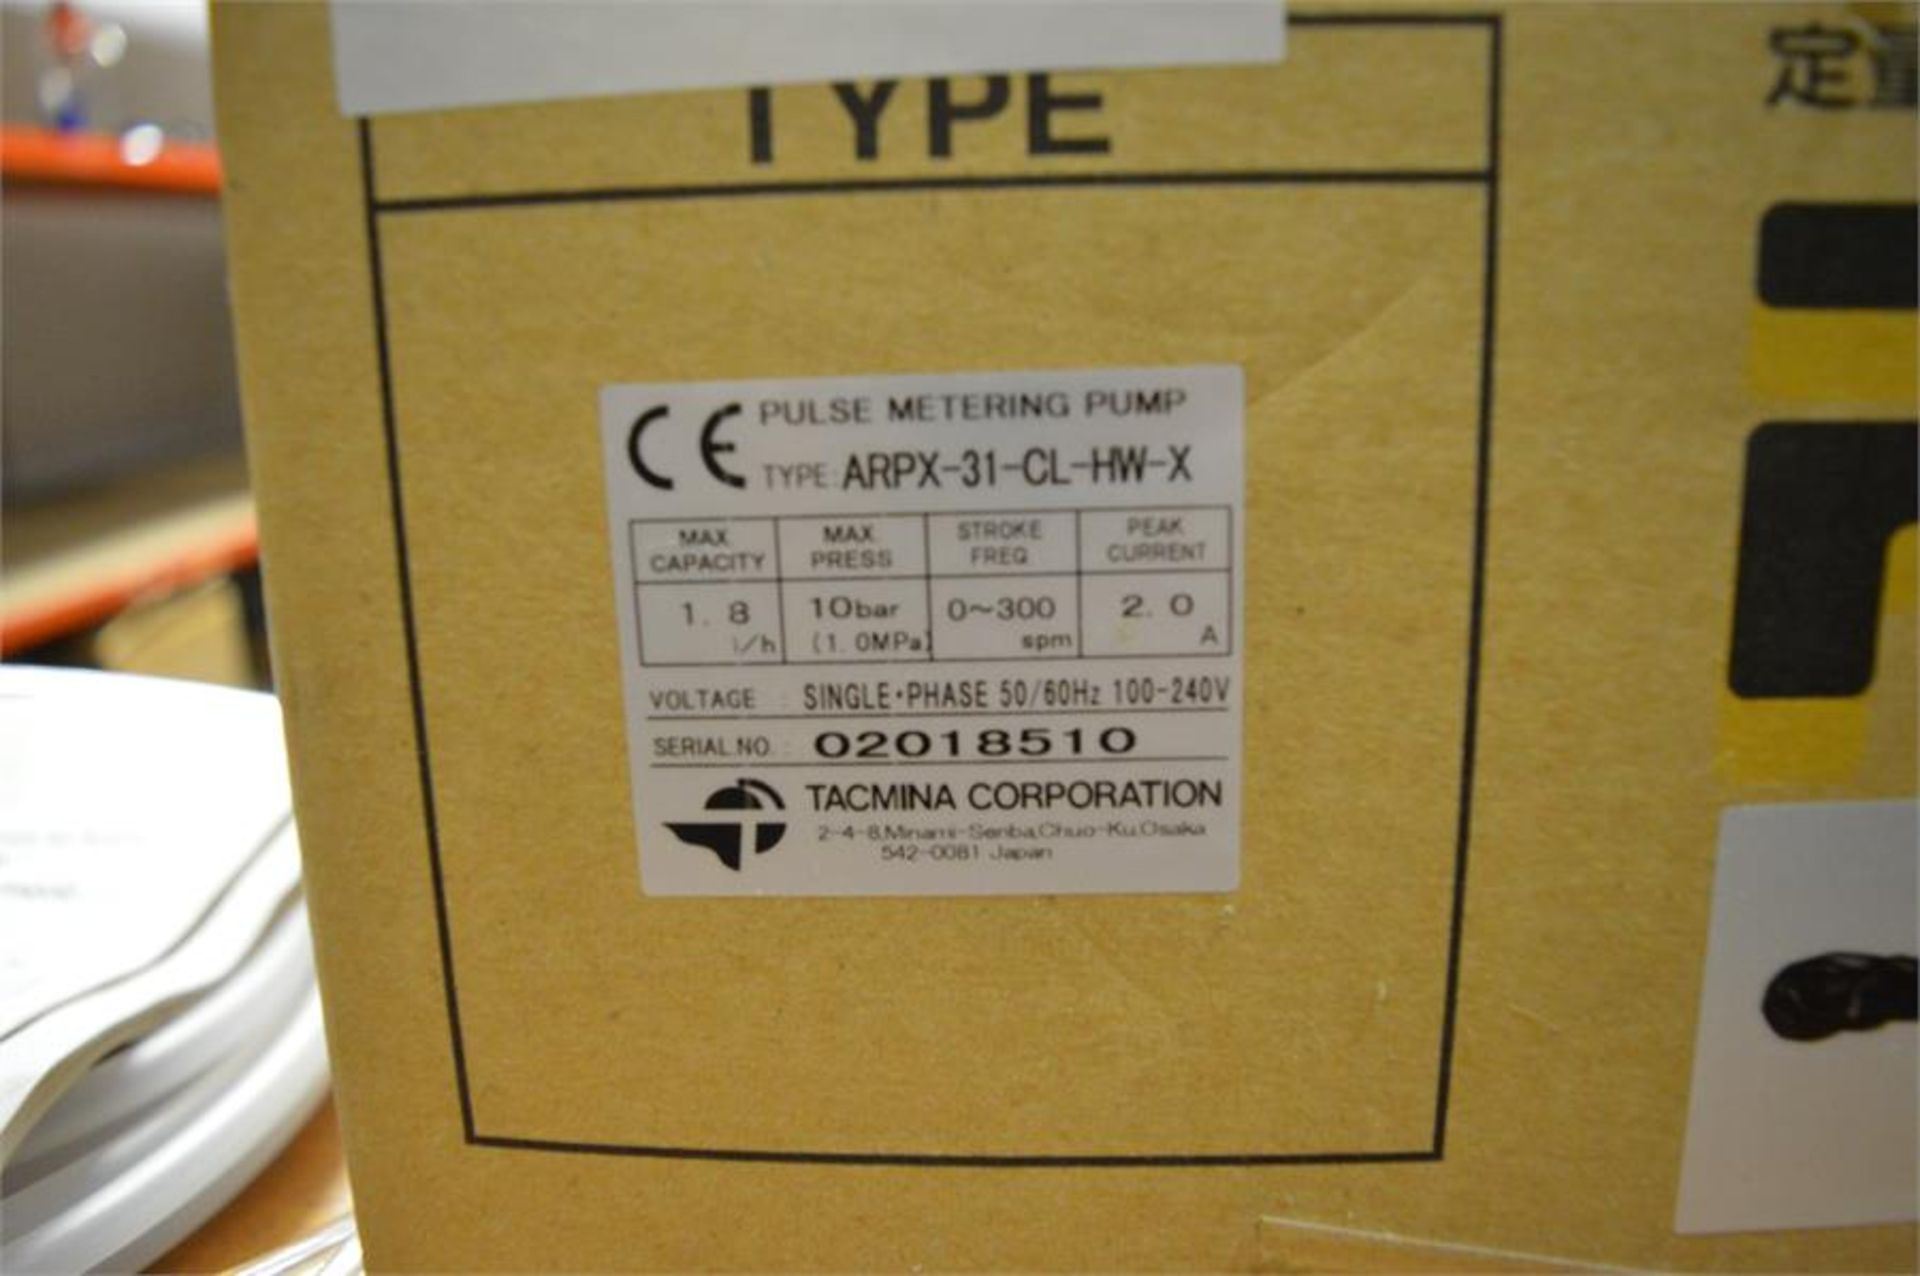 Tacmina, PXP-31-CL-HW-X pulse metering pump (boxed/opened) - Image 2 of 2